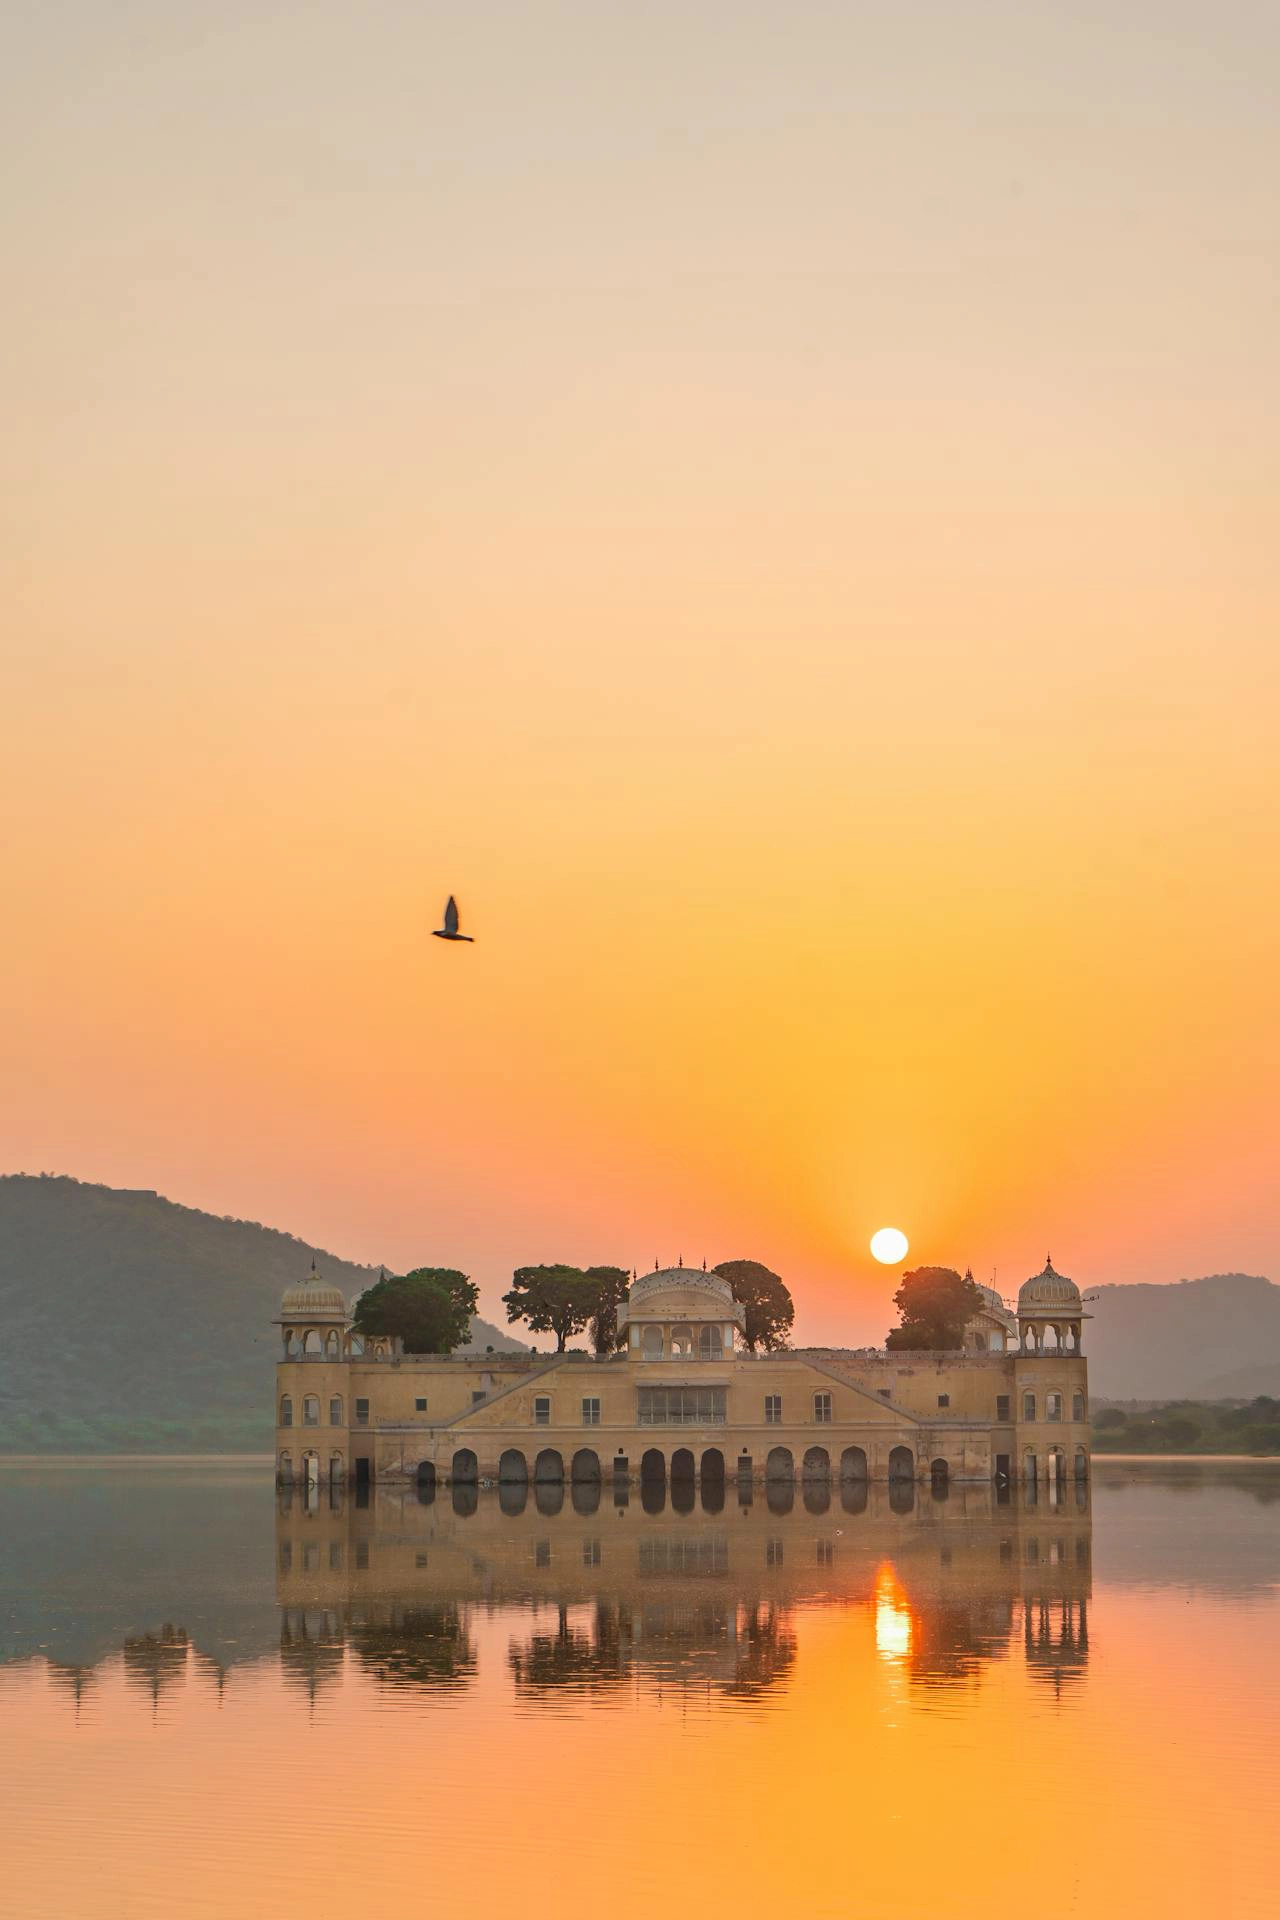 Sunburst over Indian structure on water